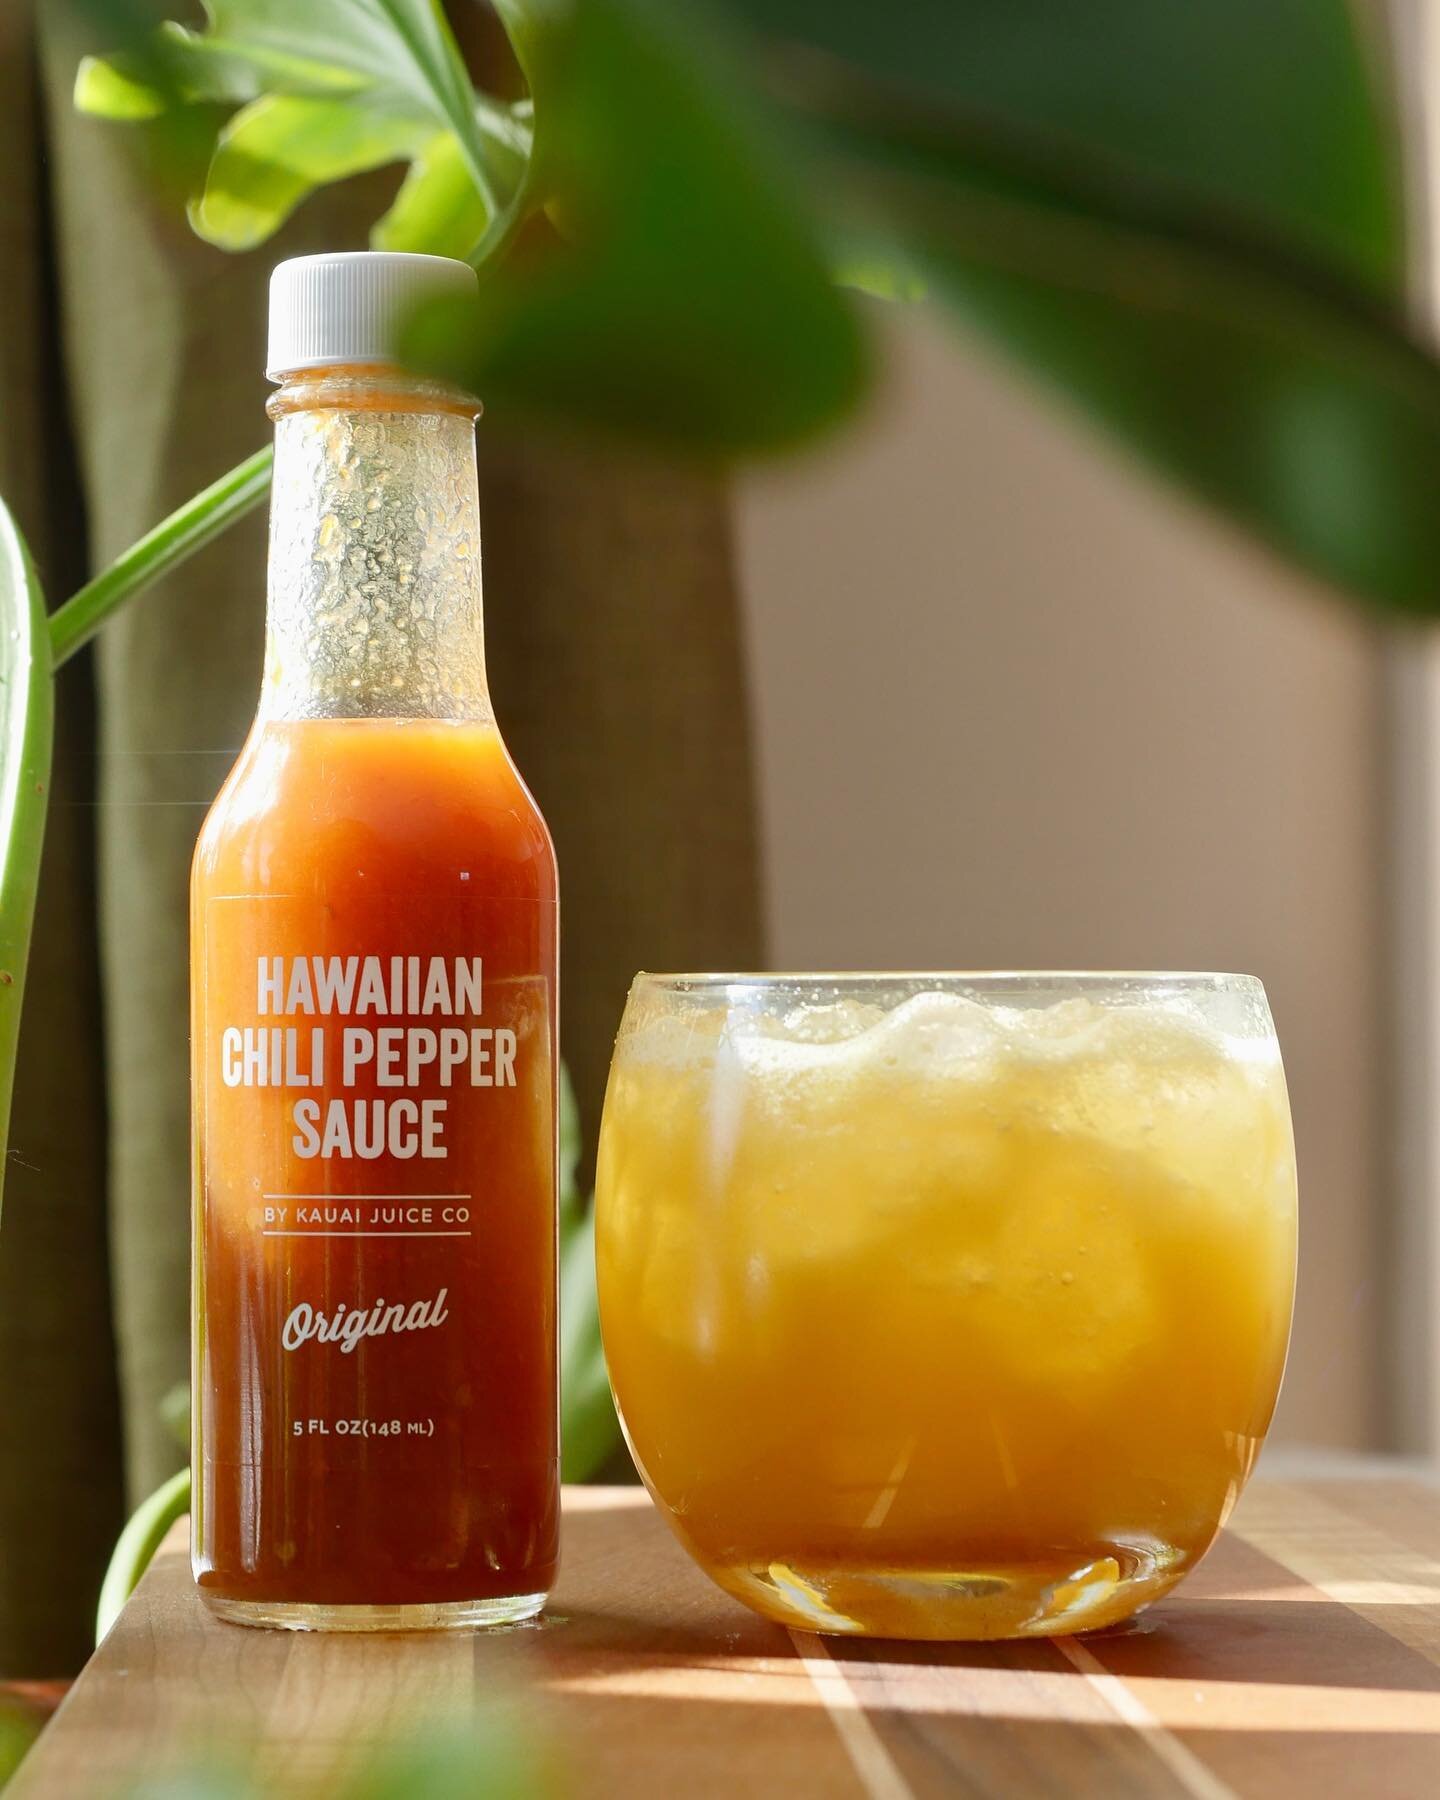 Happy Hump Day you audaciously beautiful humans!

We got a spicy one for you today...

&ldquo;Professor Pepper Hits The Beach&rdquo;

Inspired by one of our favorite hot sauces we picked up from @kauaijuiceco (if you find yourself in that slice of pa